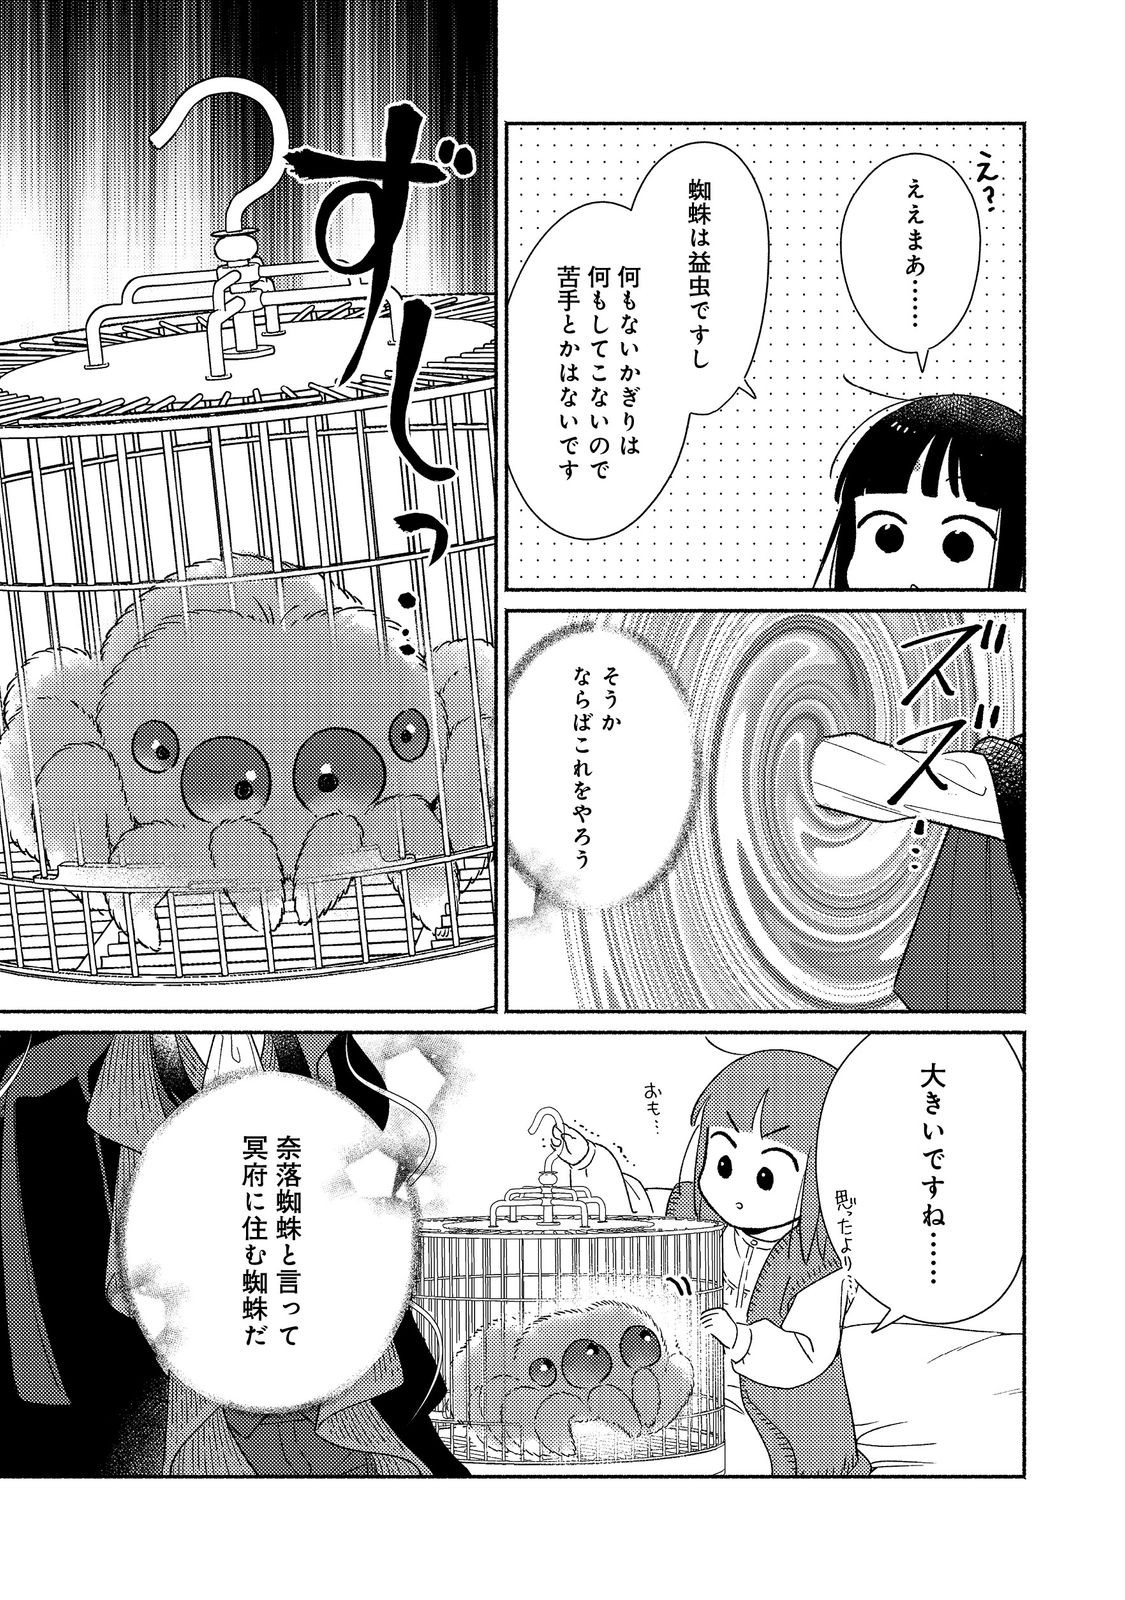 I’m the White Pig Nobleman 第26.2話 - Page 16